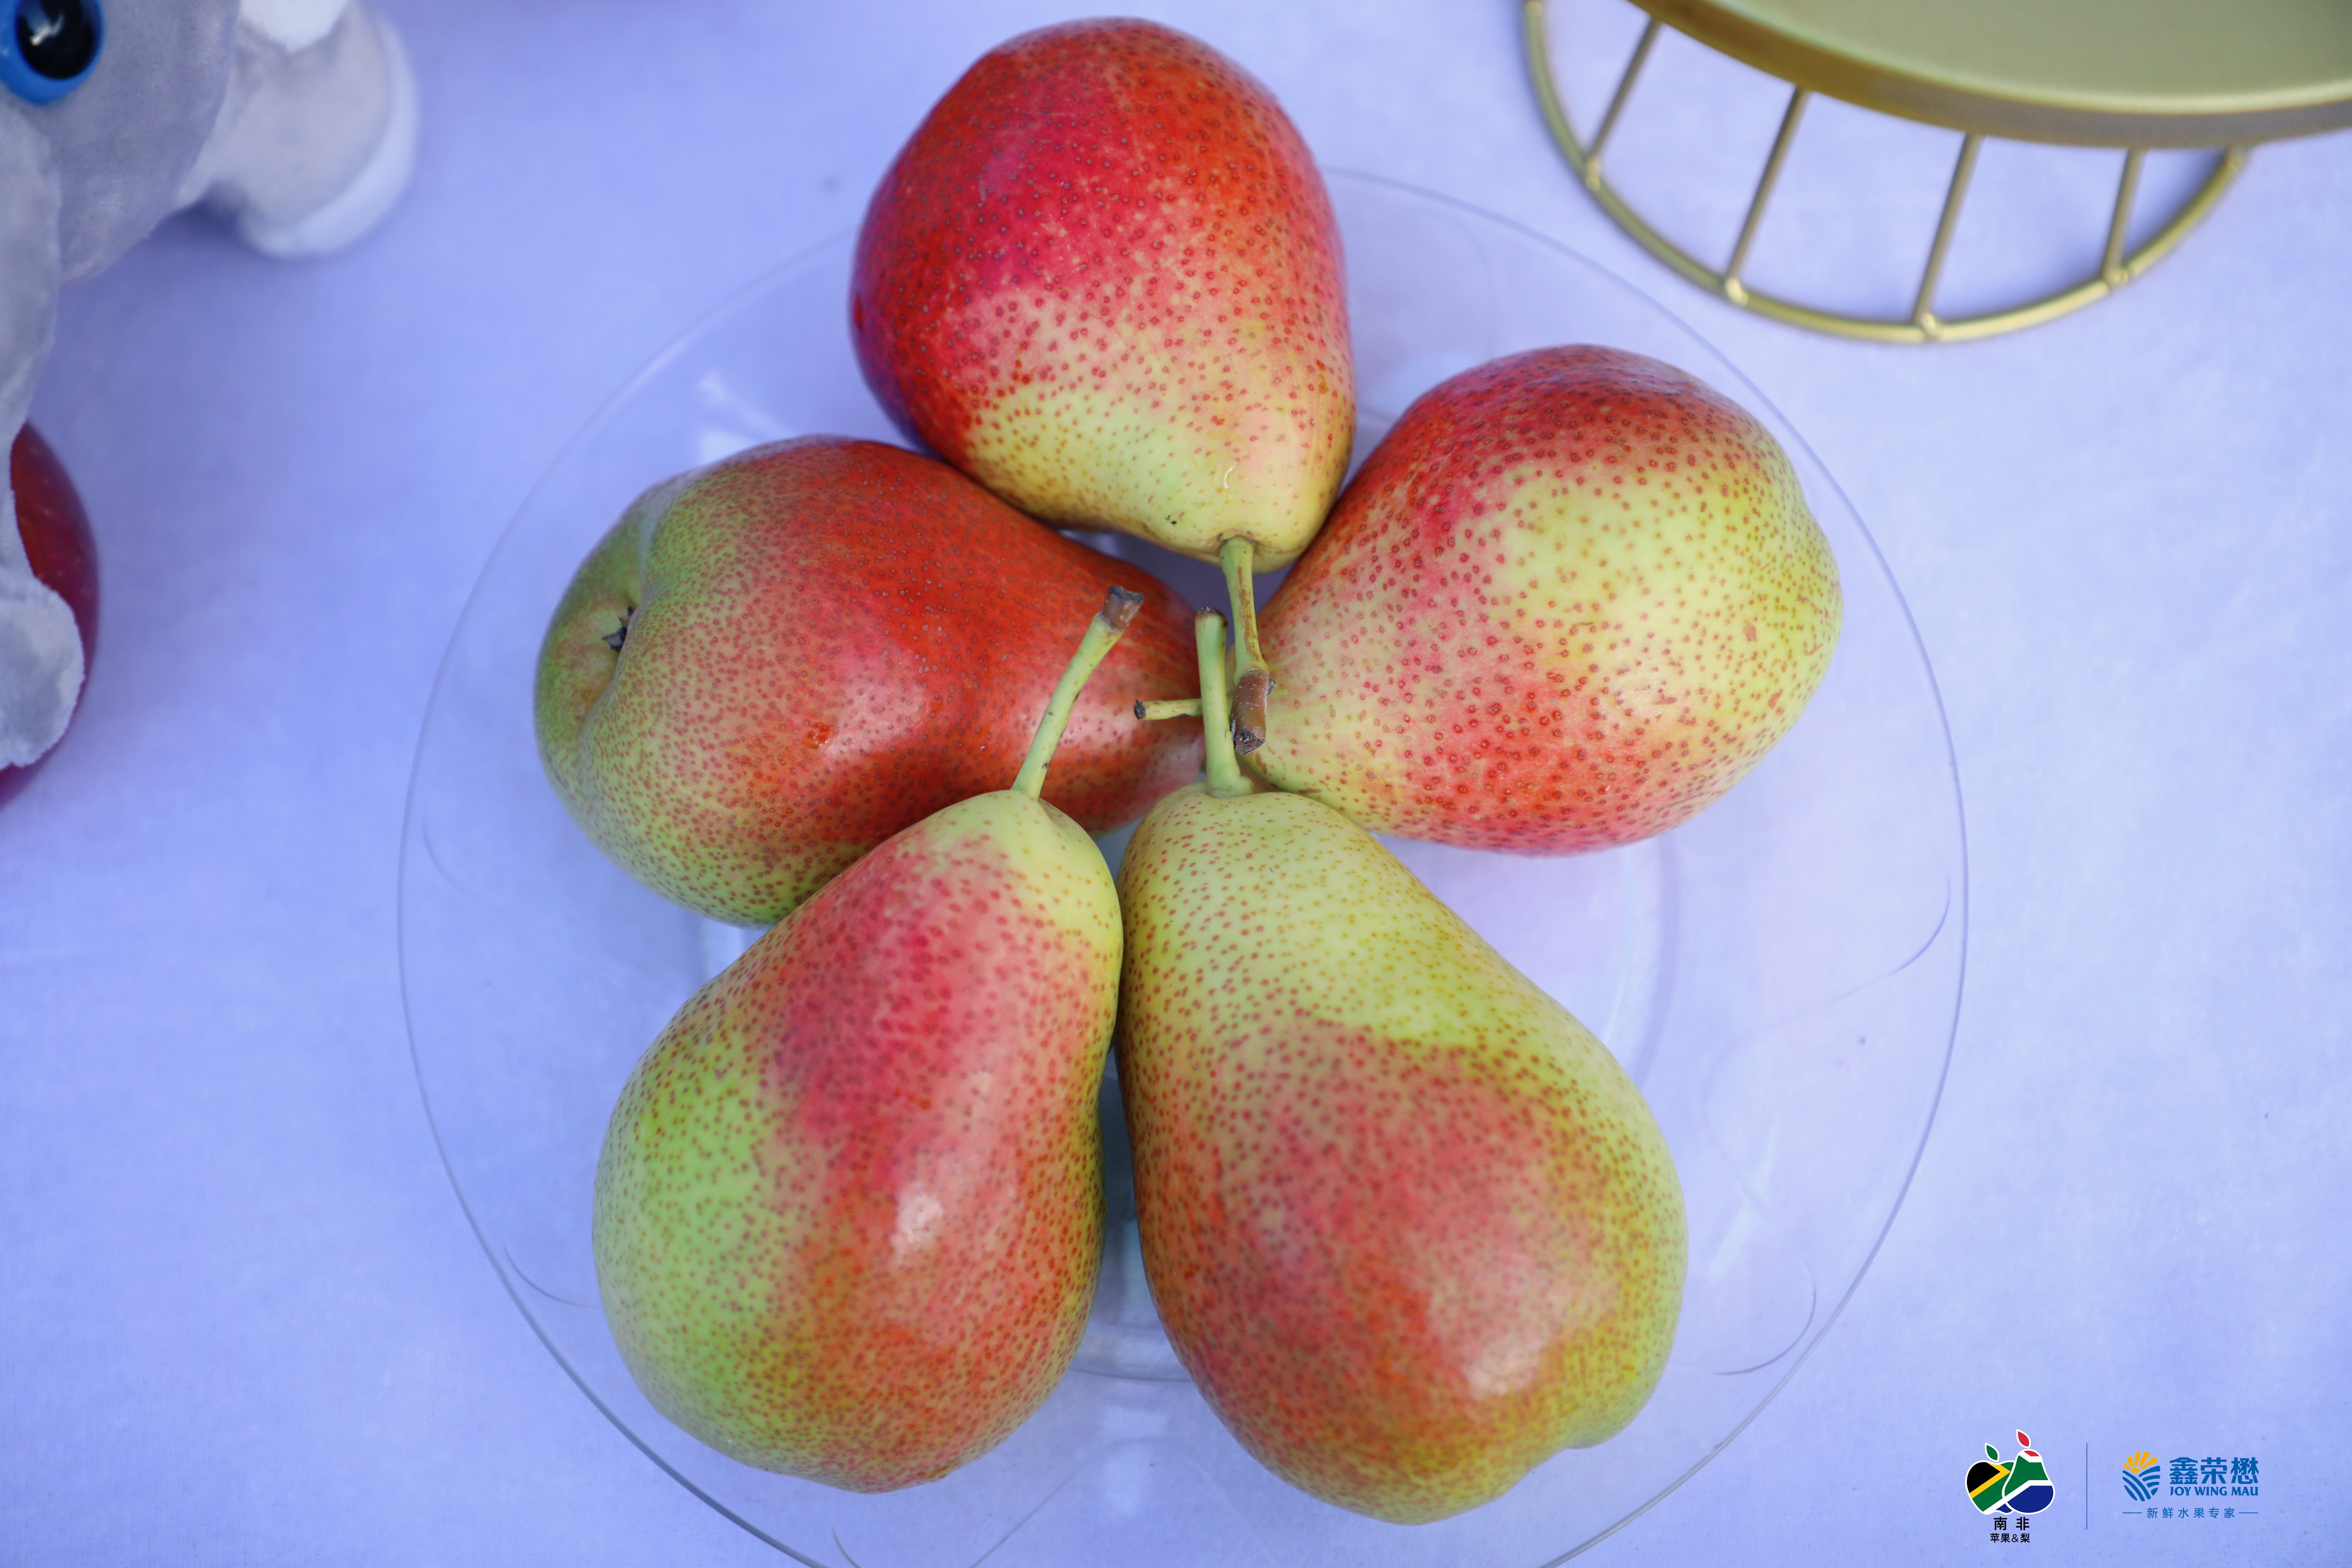 Hortgro And Joy Wing Mau Team Up To Promote South African Apples And Pears In China Produce Report